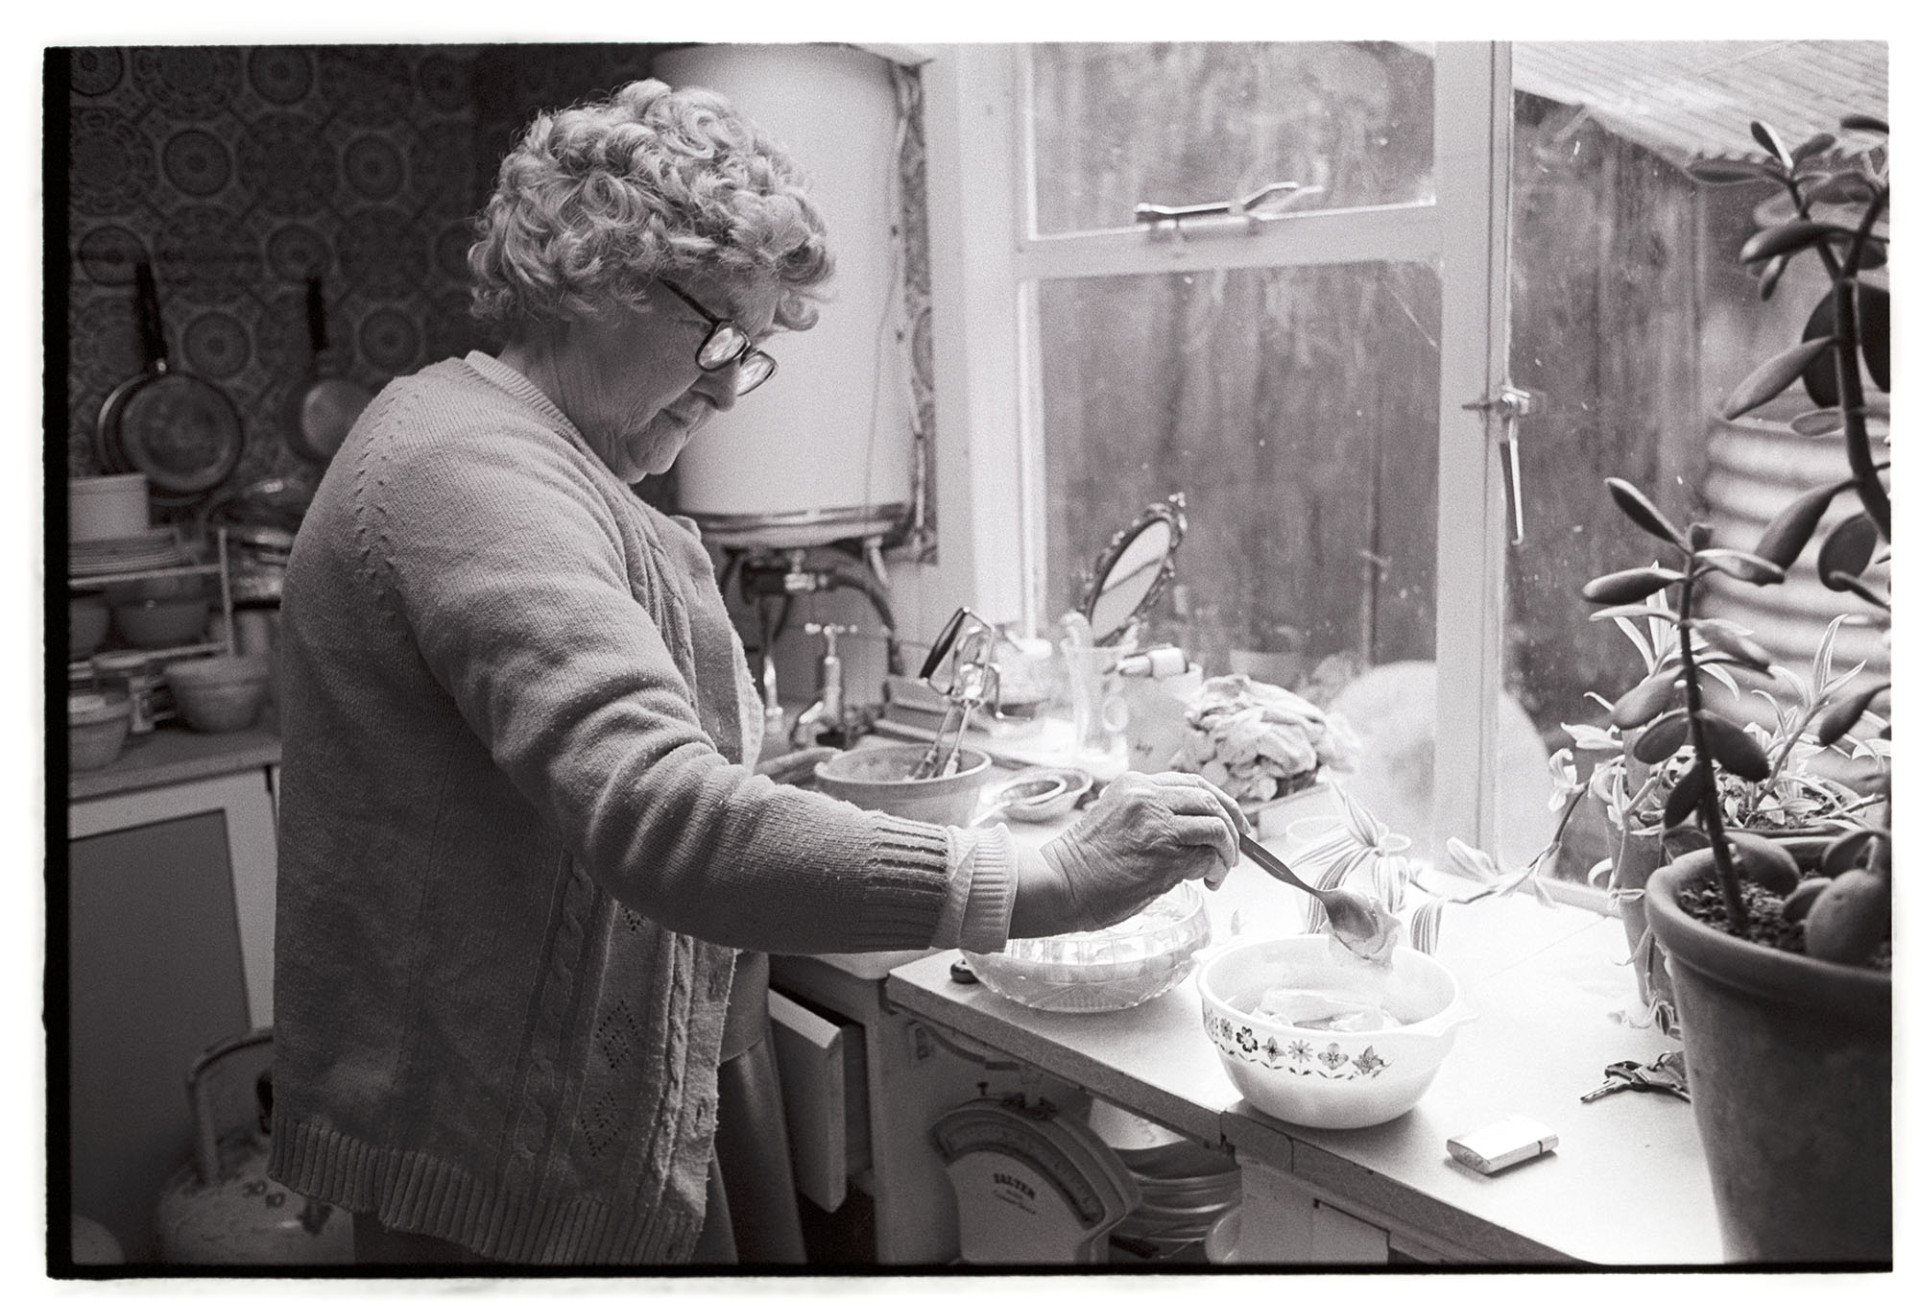 Woman making trifle, adding custard, wearing wig. 
[Mrs Hutchins adding custard to a trifle she is making in her kitchen in Dolton. She is wearing a wig.]